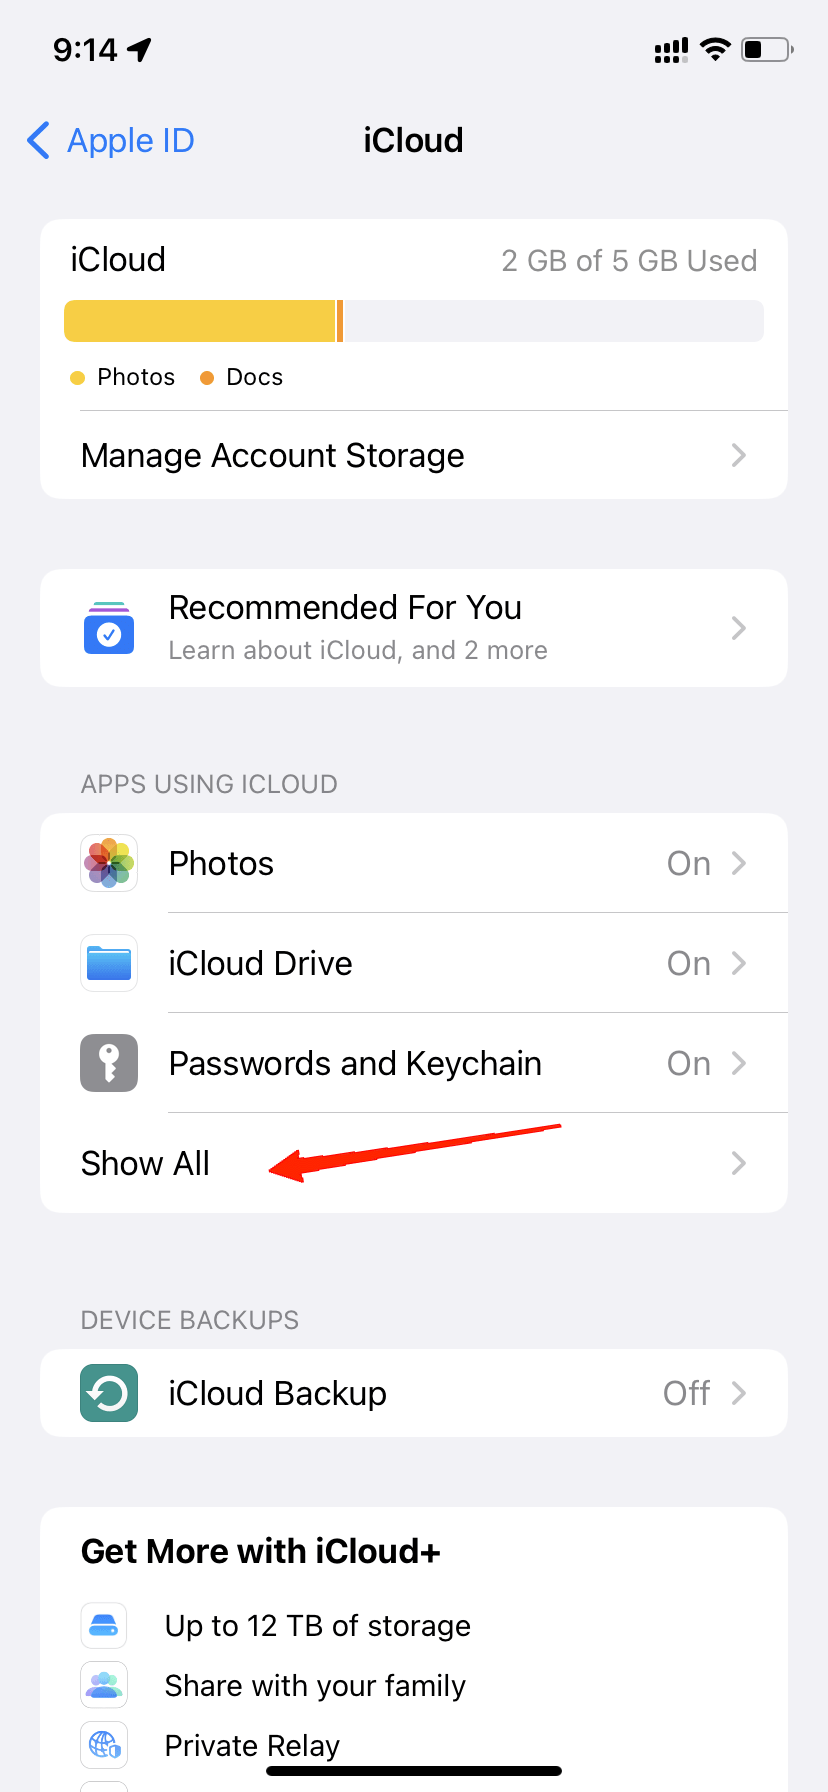 Tap on 'Show All' under the 'Apps using iCloud' section.